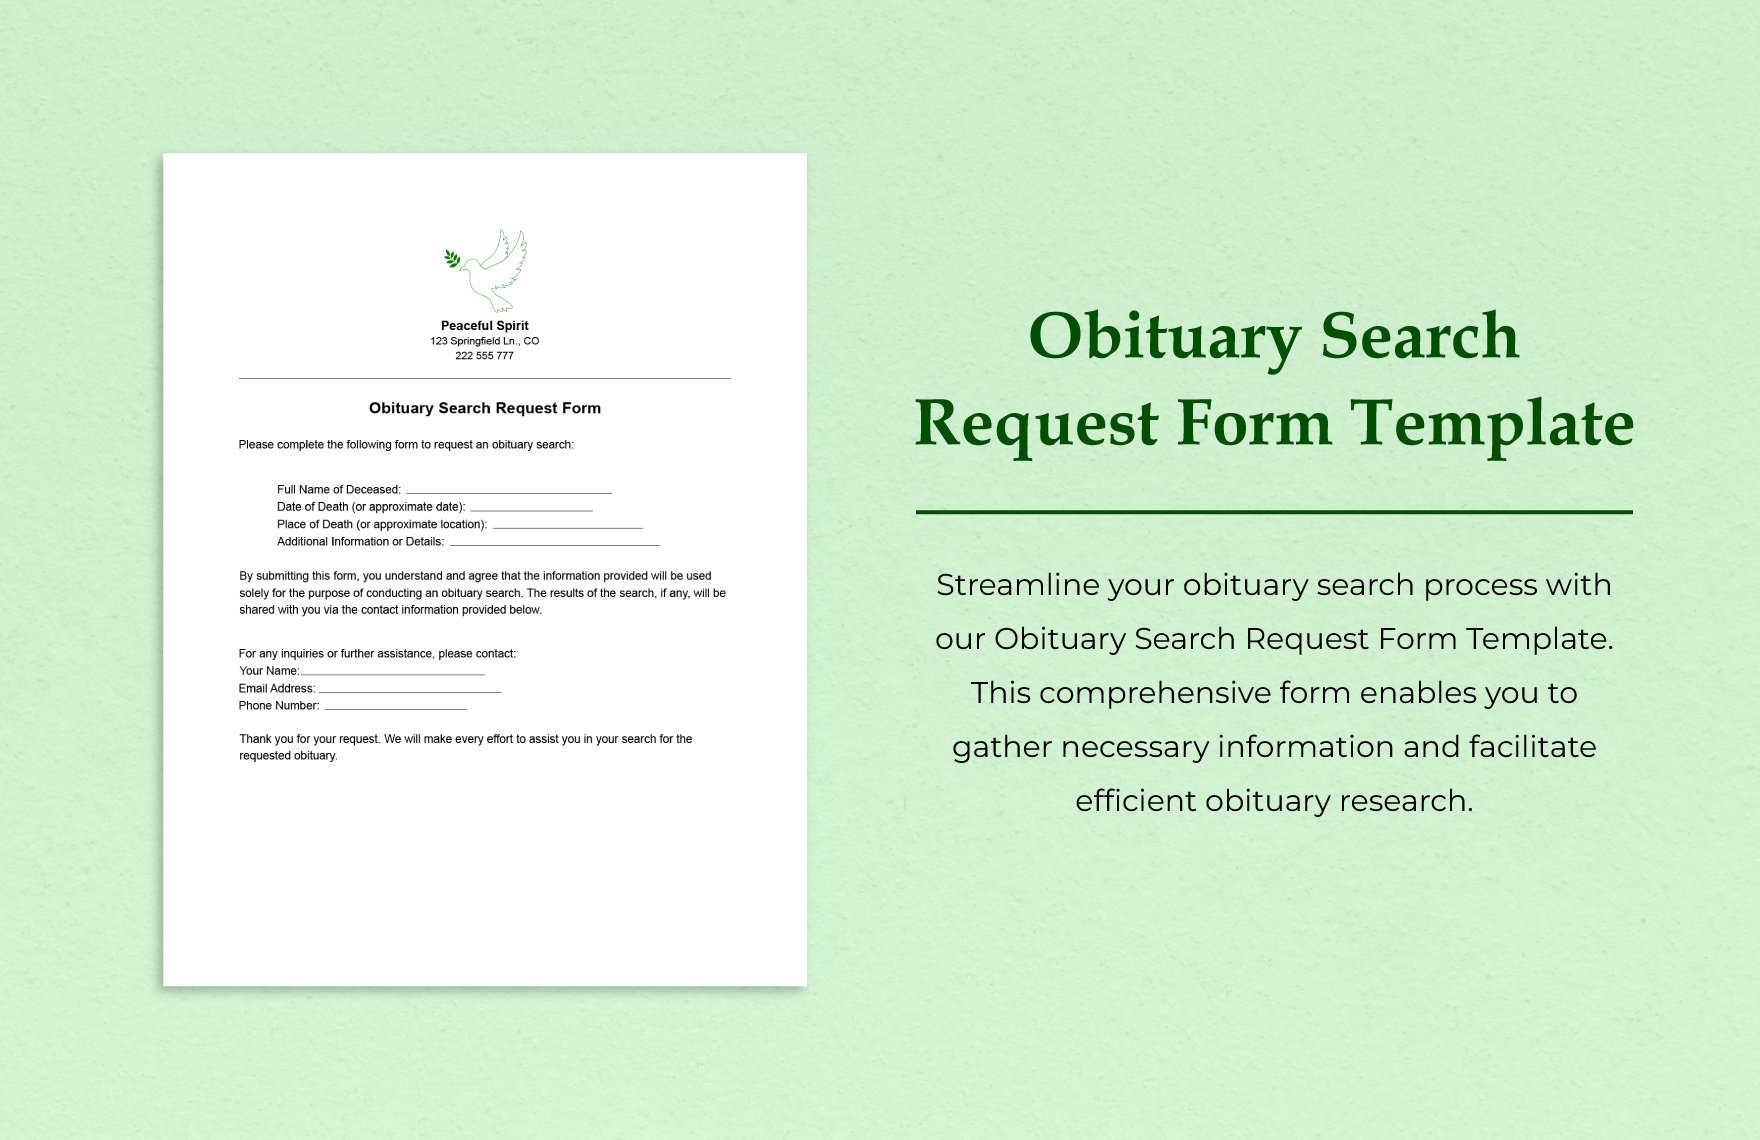 Obituary Search Request Form Template